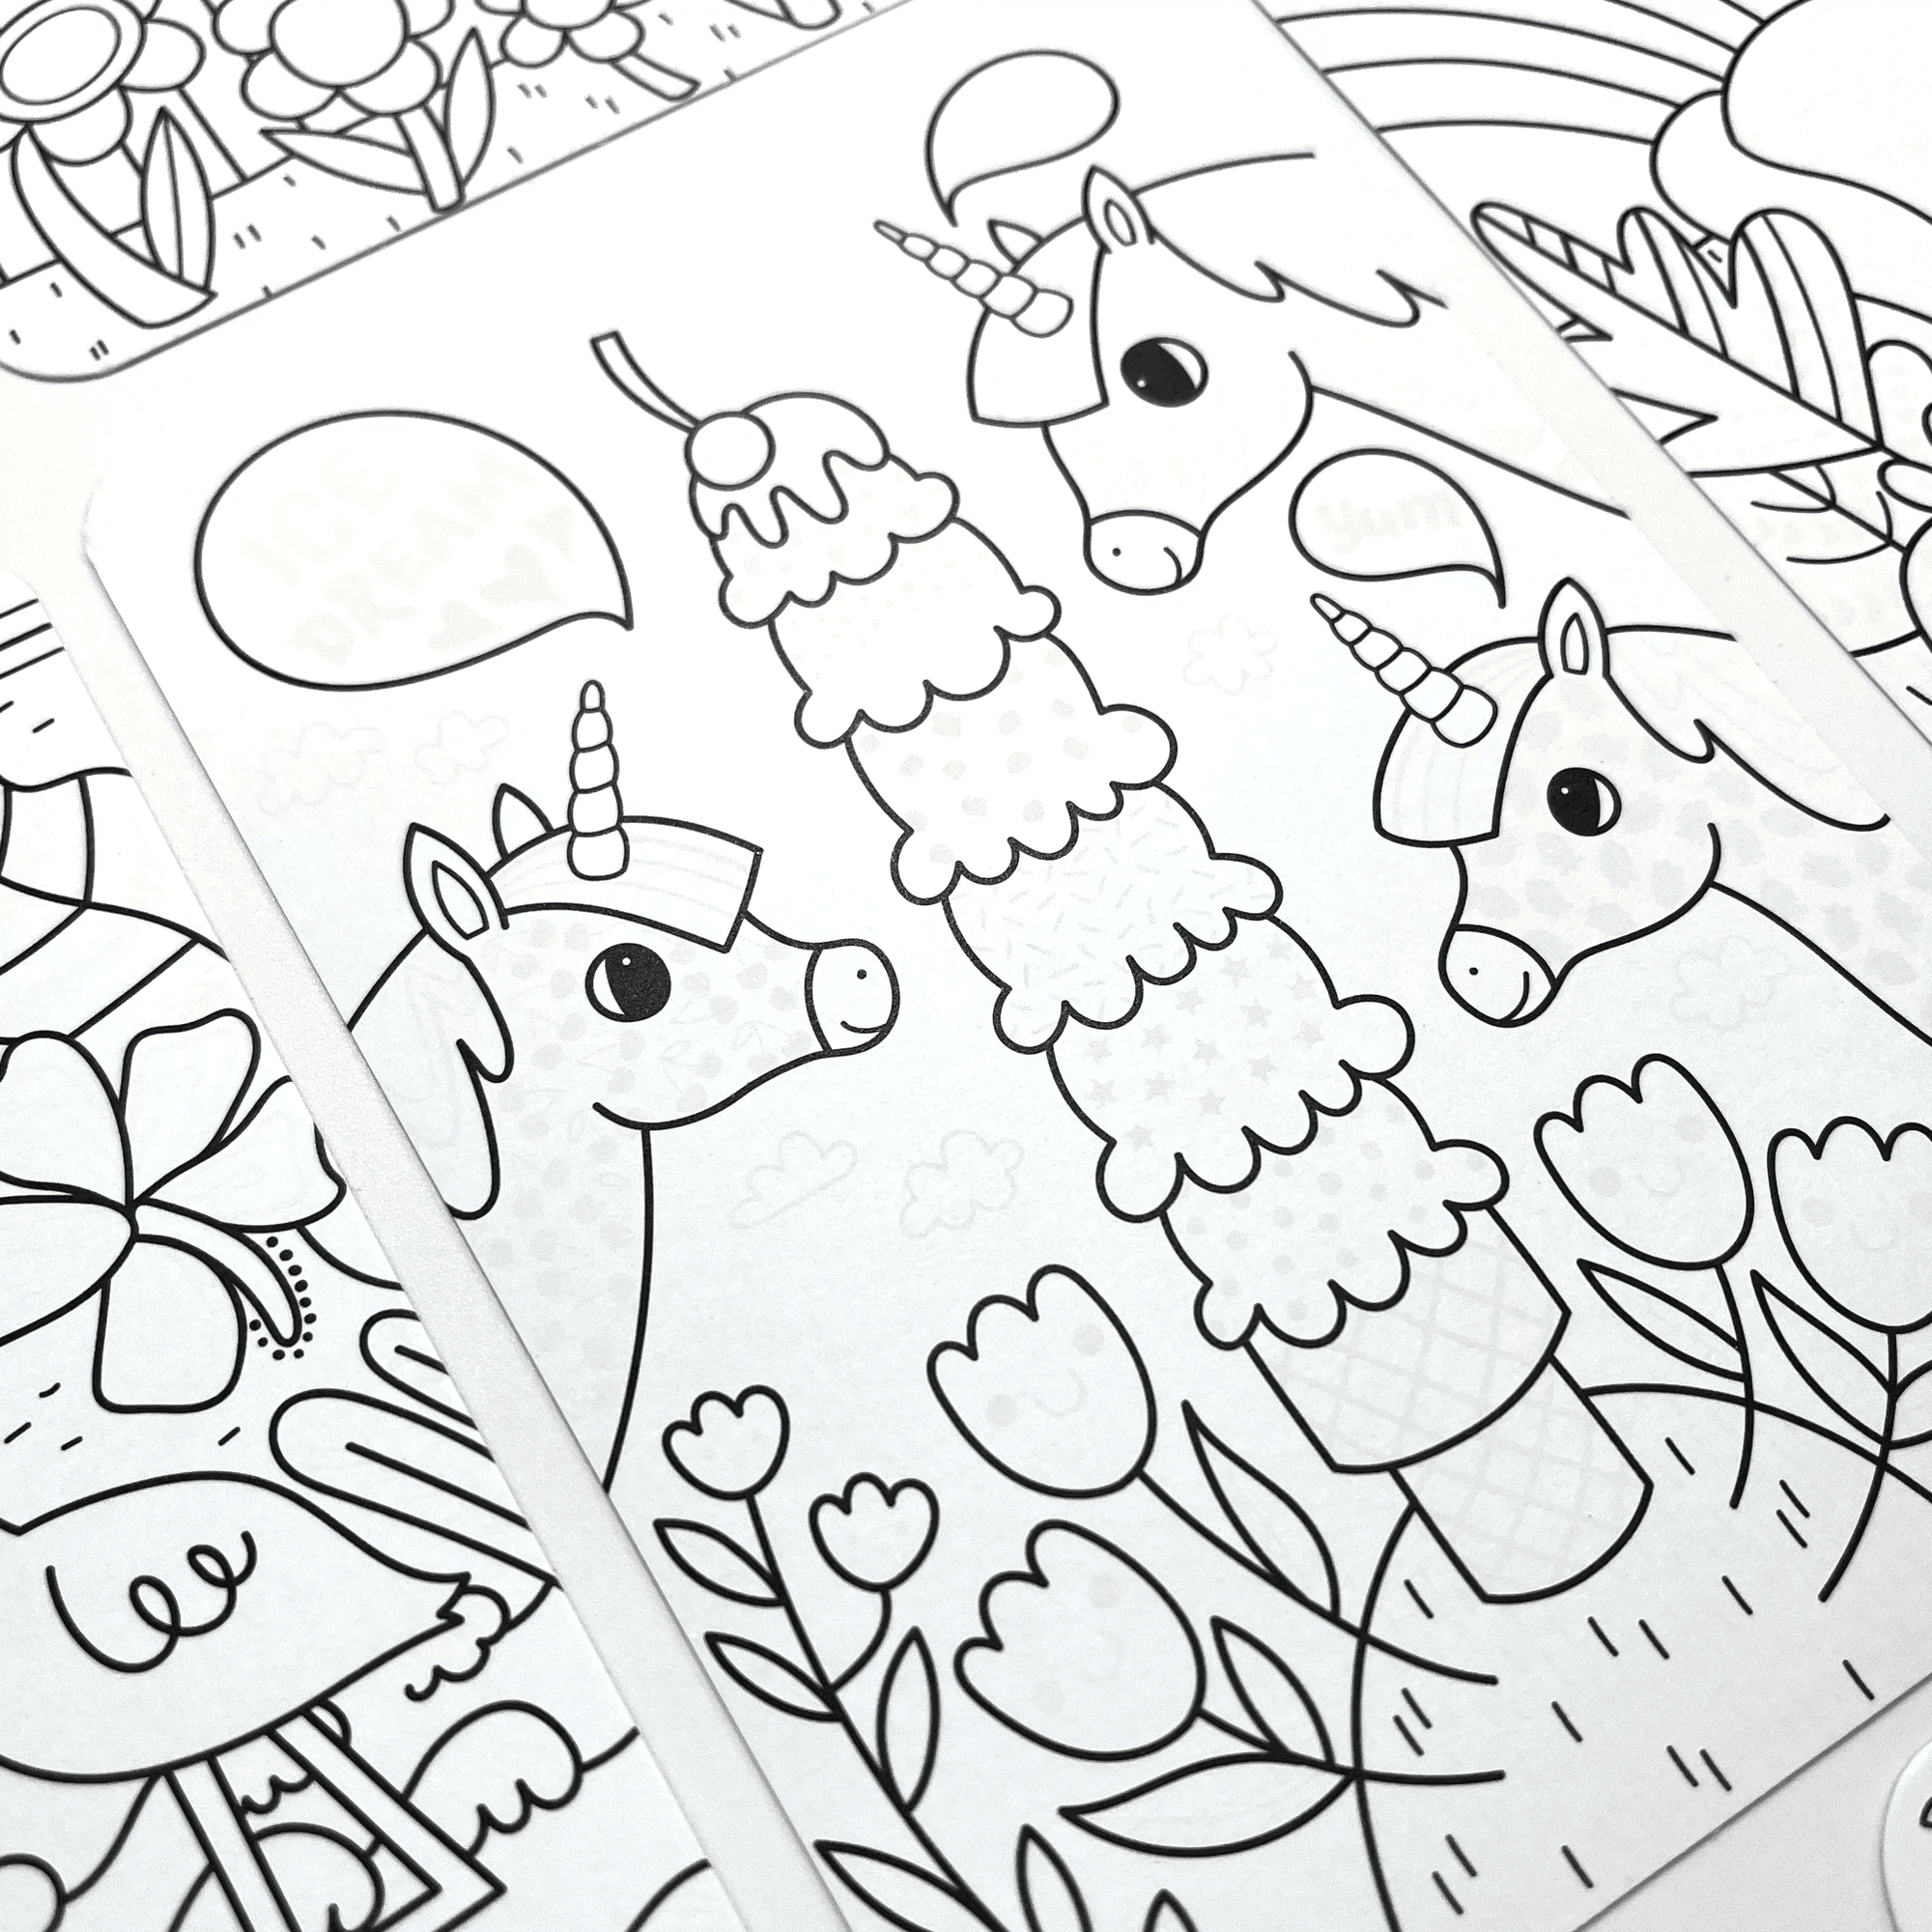 OOLY Undercover Art Hidden Pattern Coloring Activity Art Cards - Unicorn Friends blank coloring page